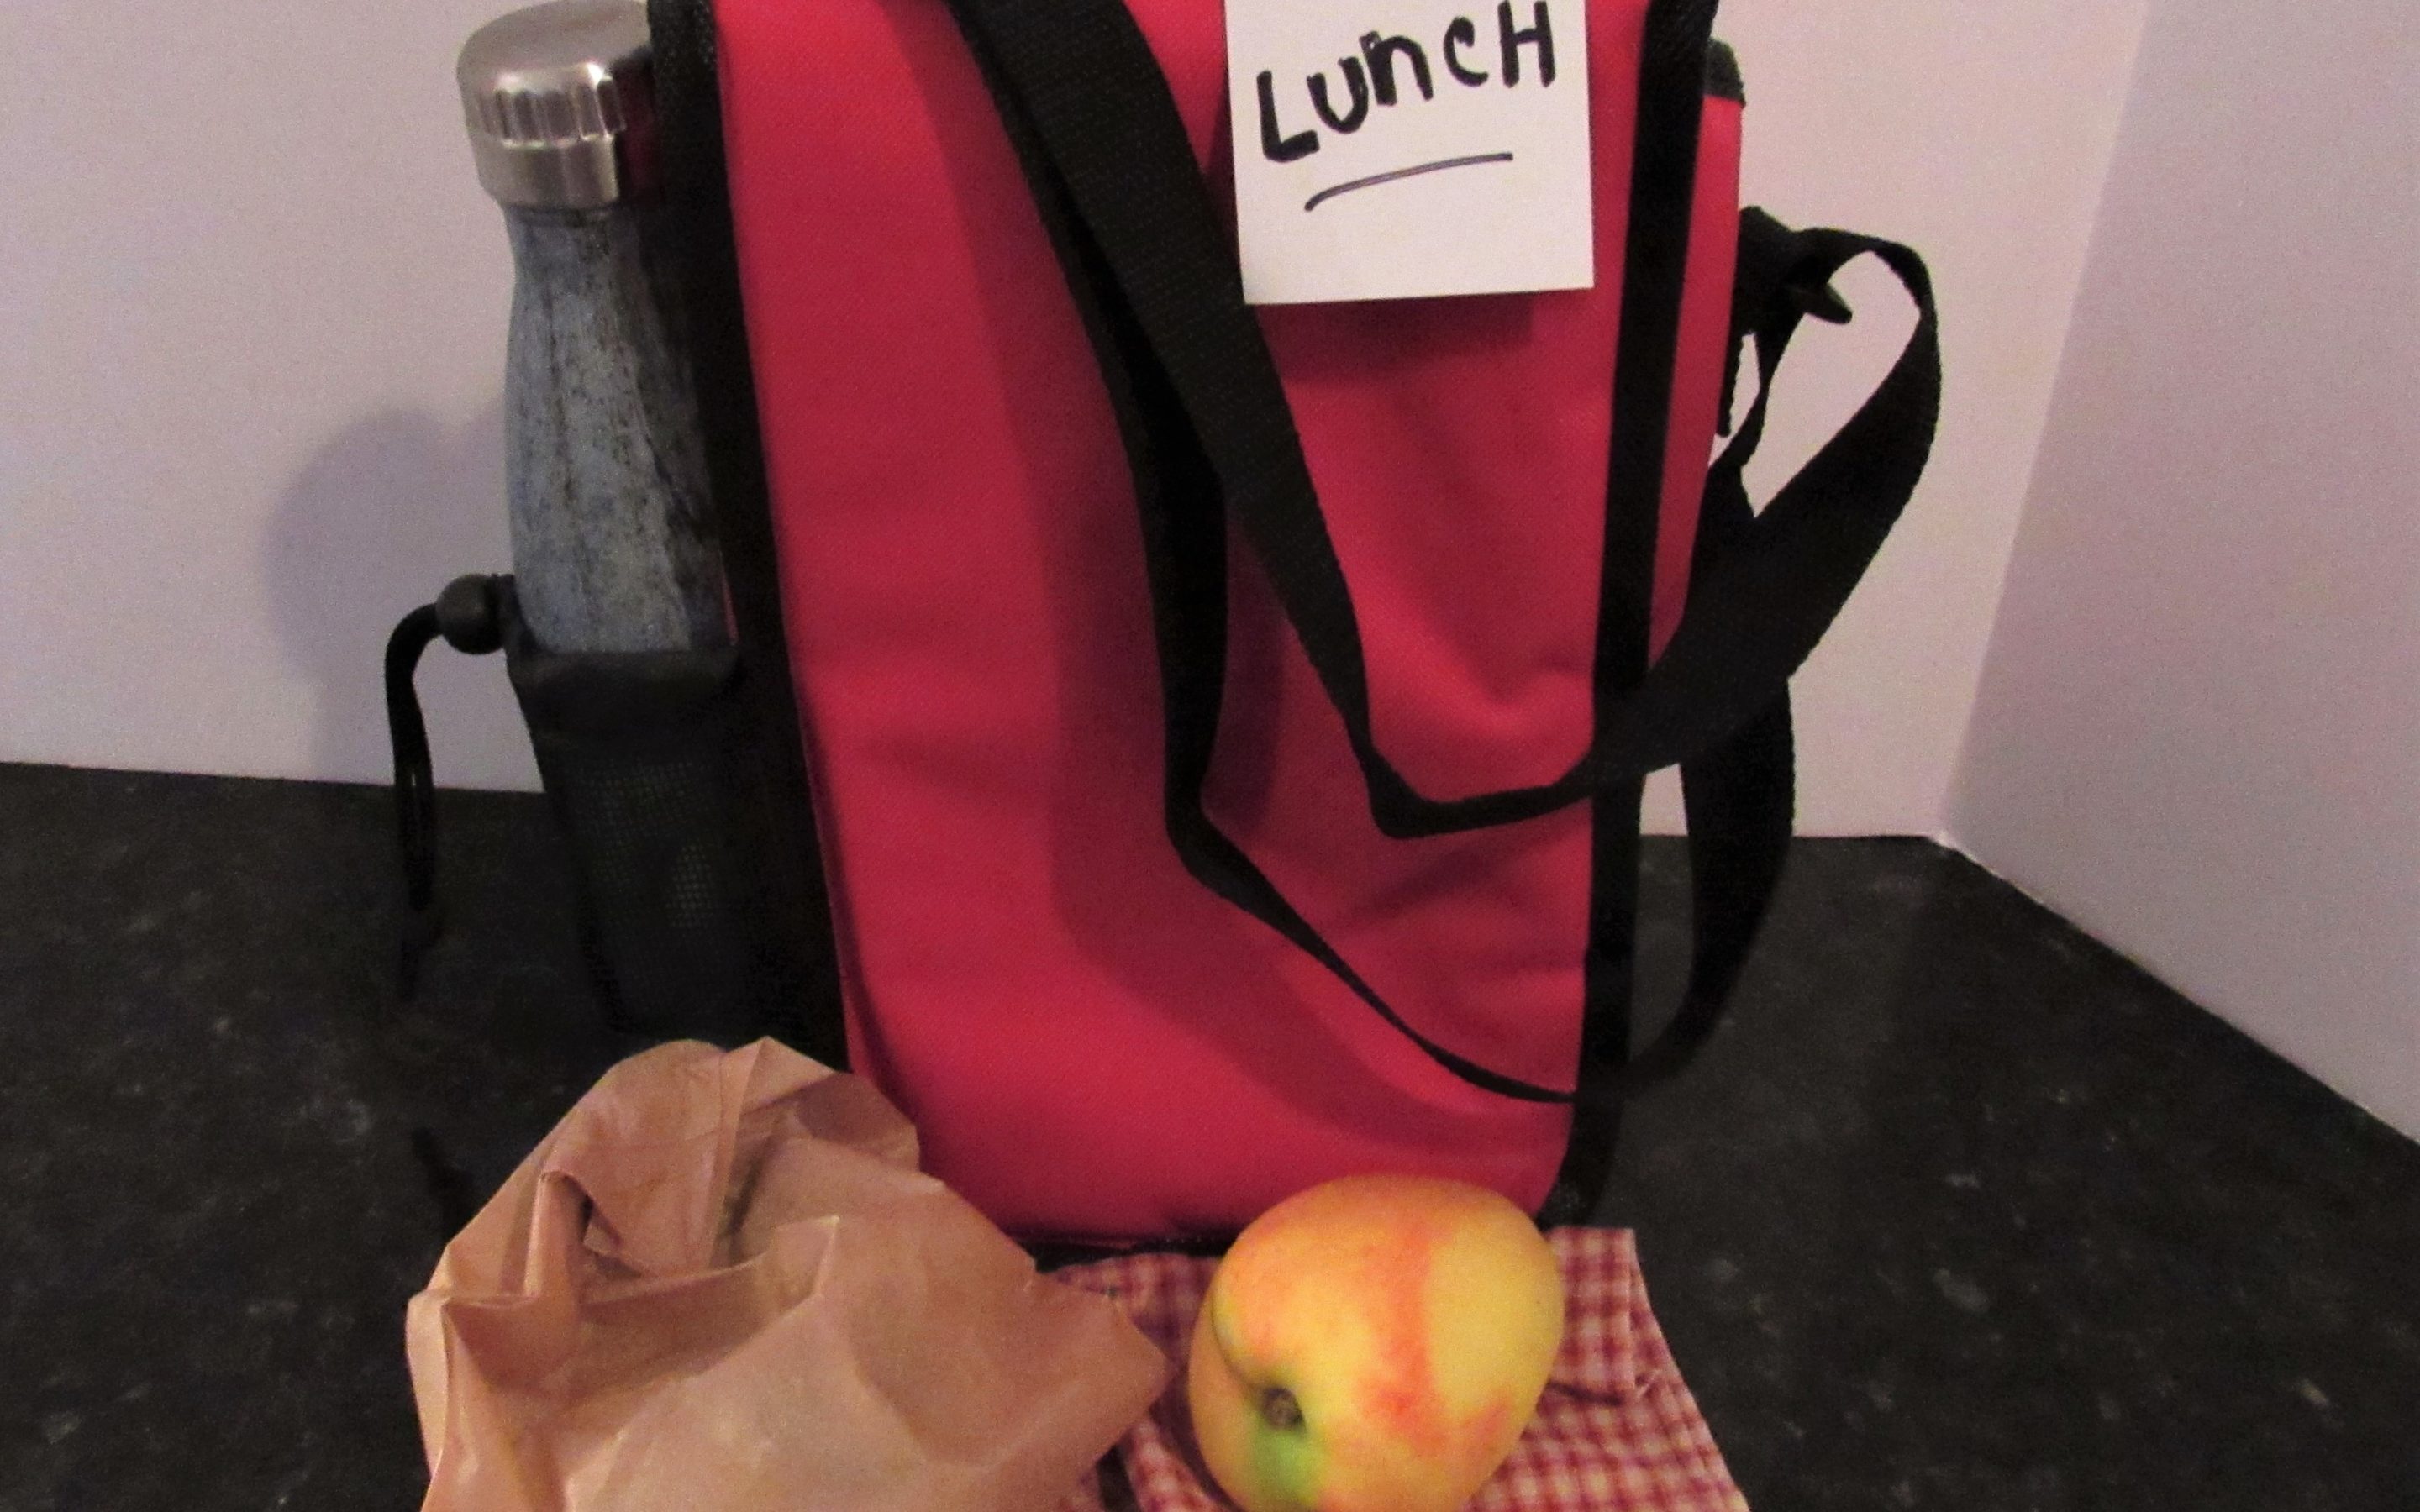 7 Smart Tips for Packing a Better Lunch